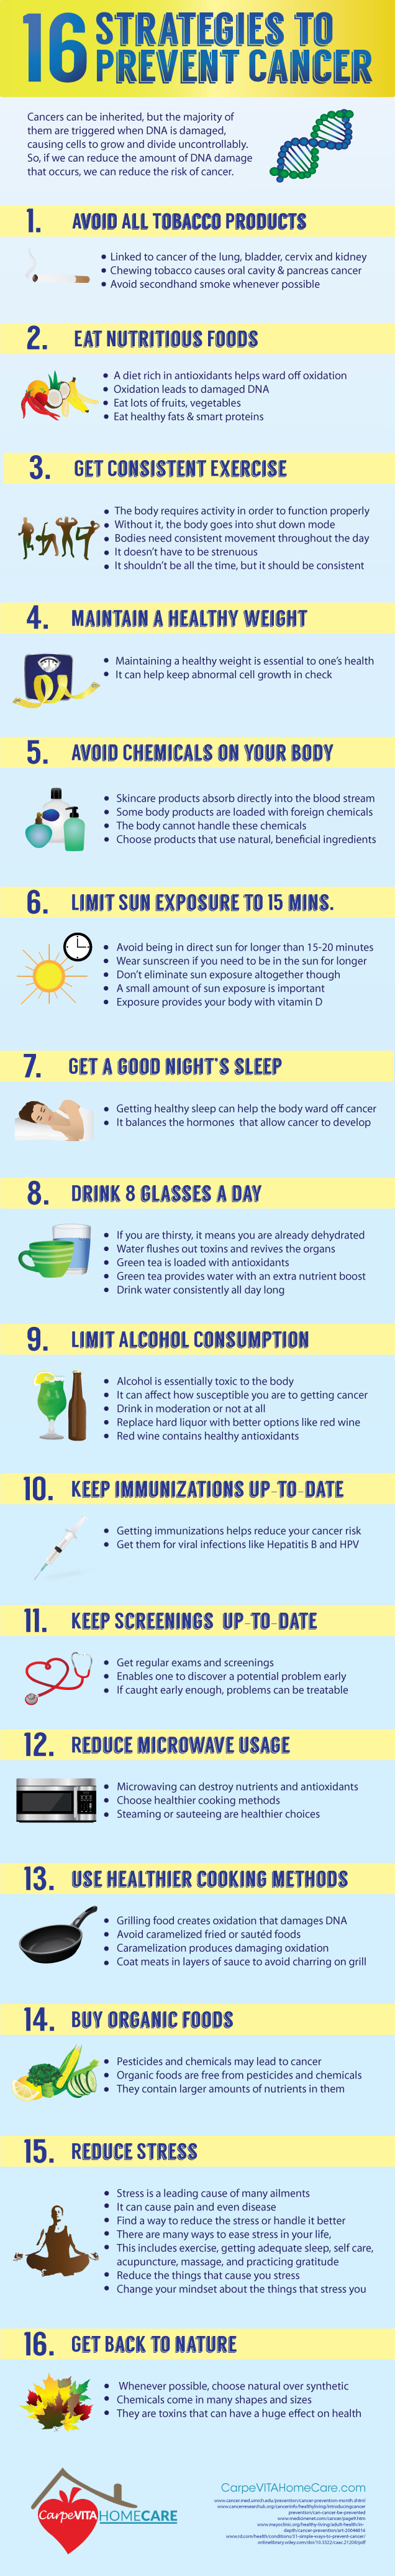 16 Strategies to Prevent Cancer